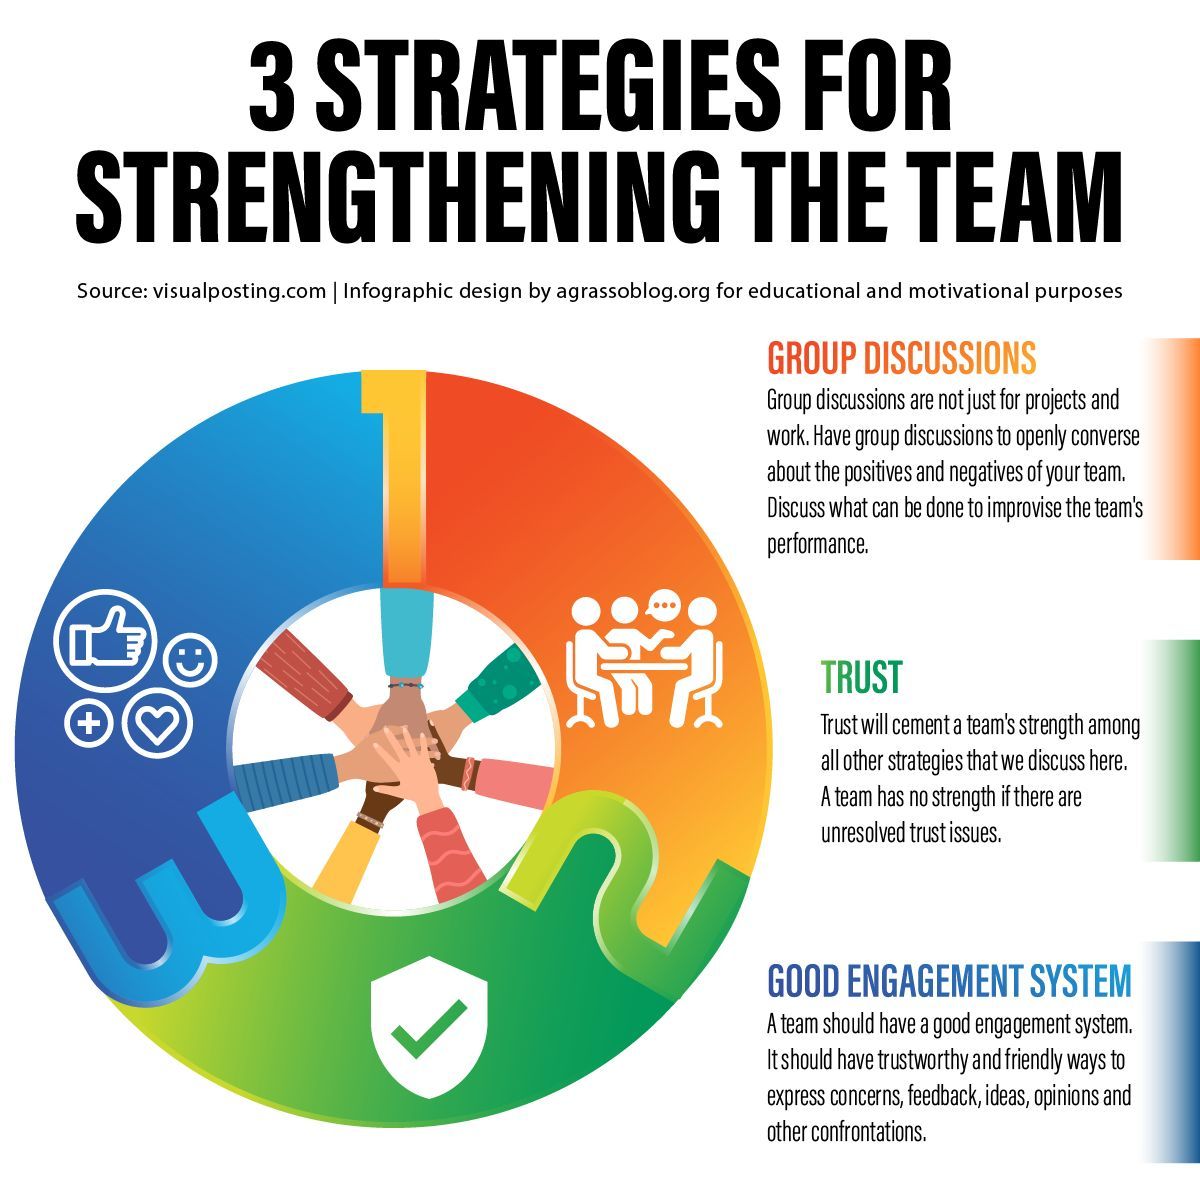 Building a cohesive team relies on trust, open communication, and a strong engagement system. 

#teamworking